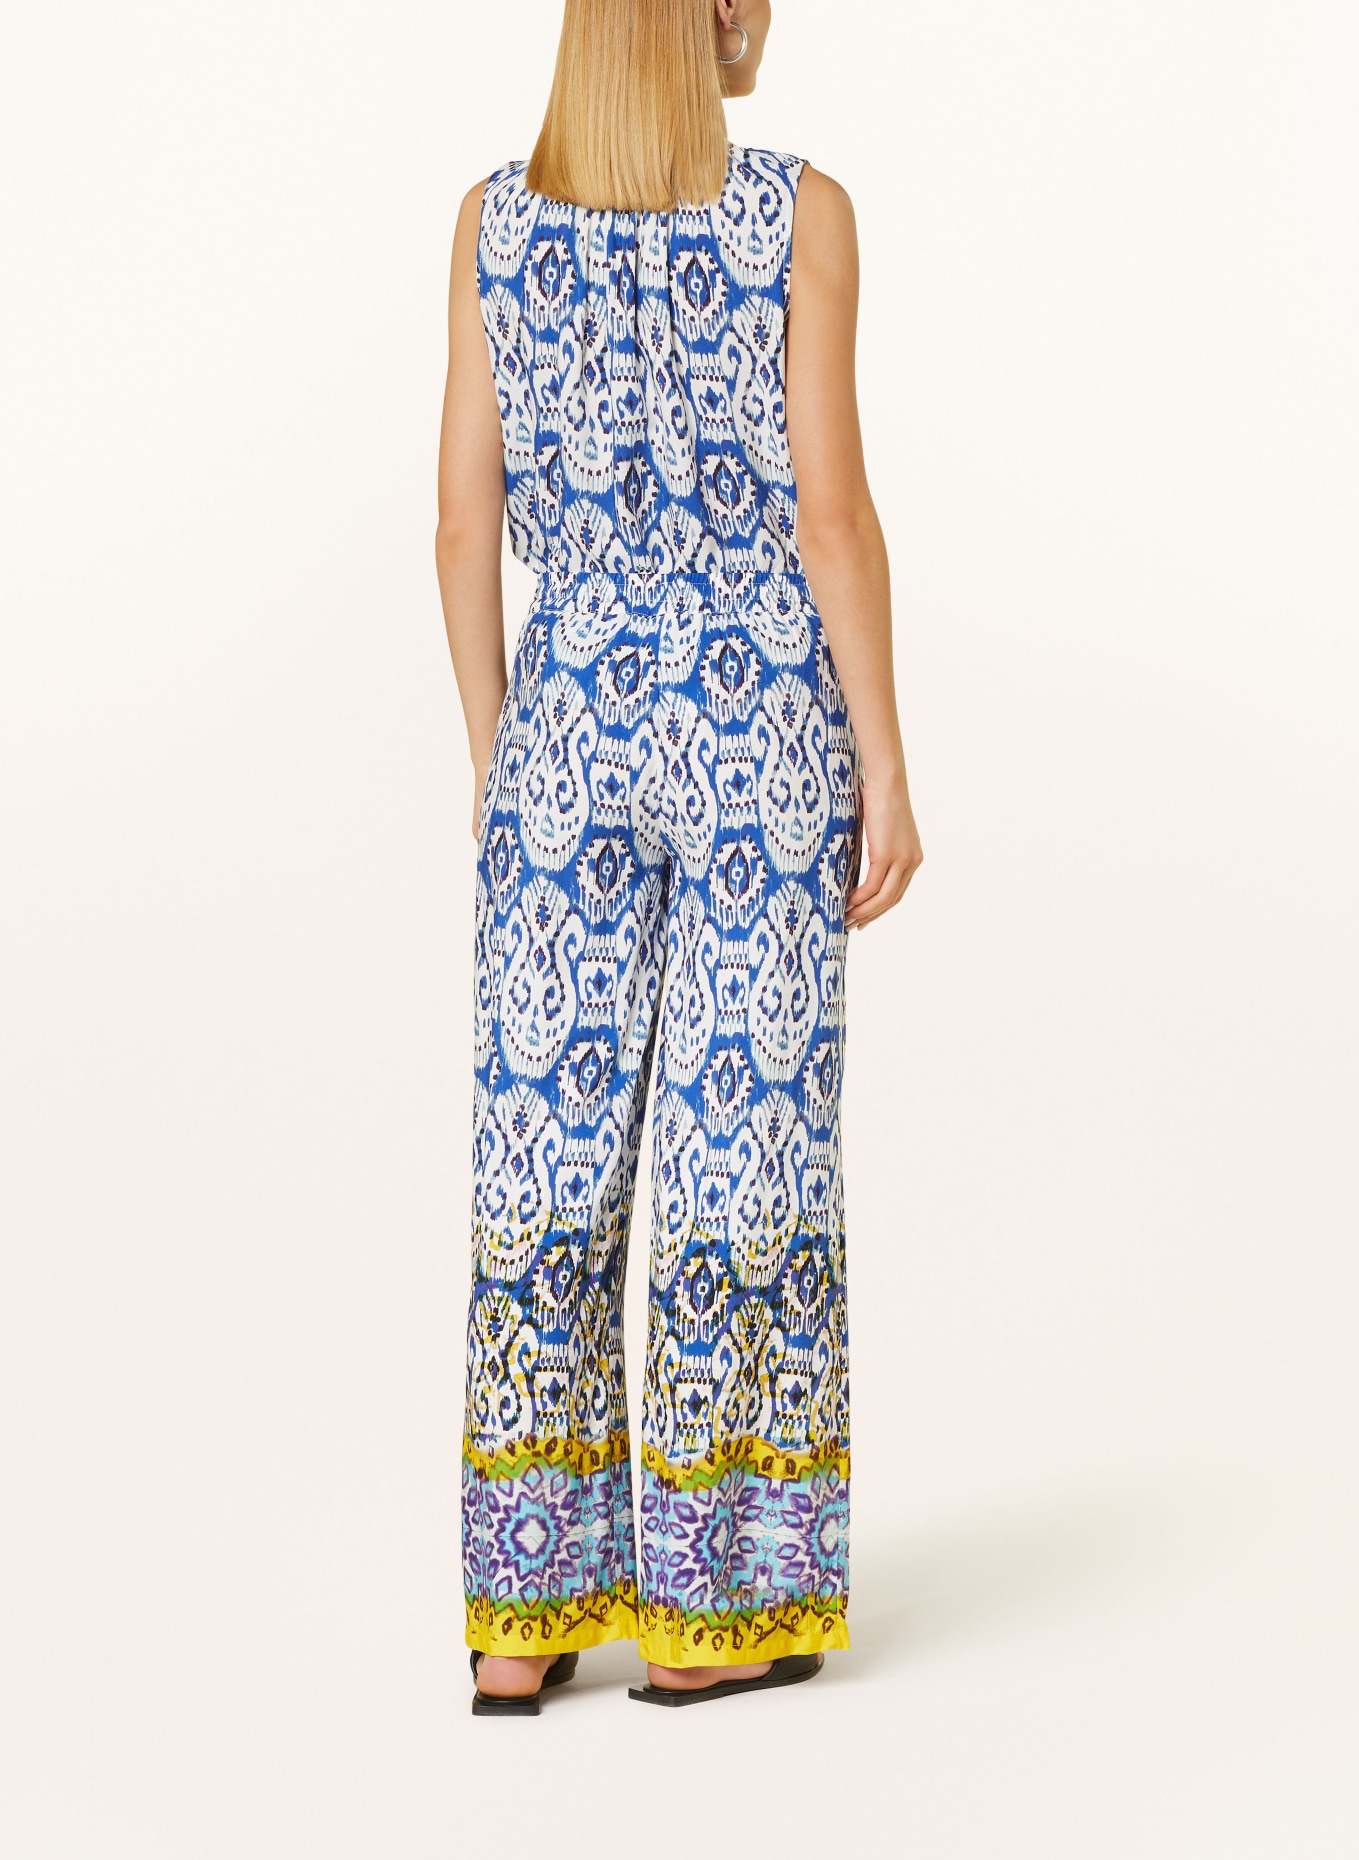 Emily VAN DEN BERGH Pants in jogger style, Color: BLUE/ WHITE/ YELLOW (Image 3)